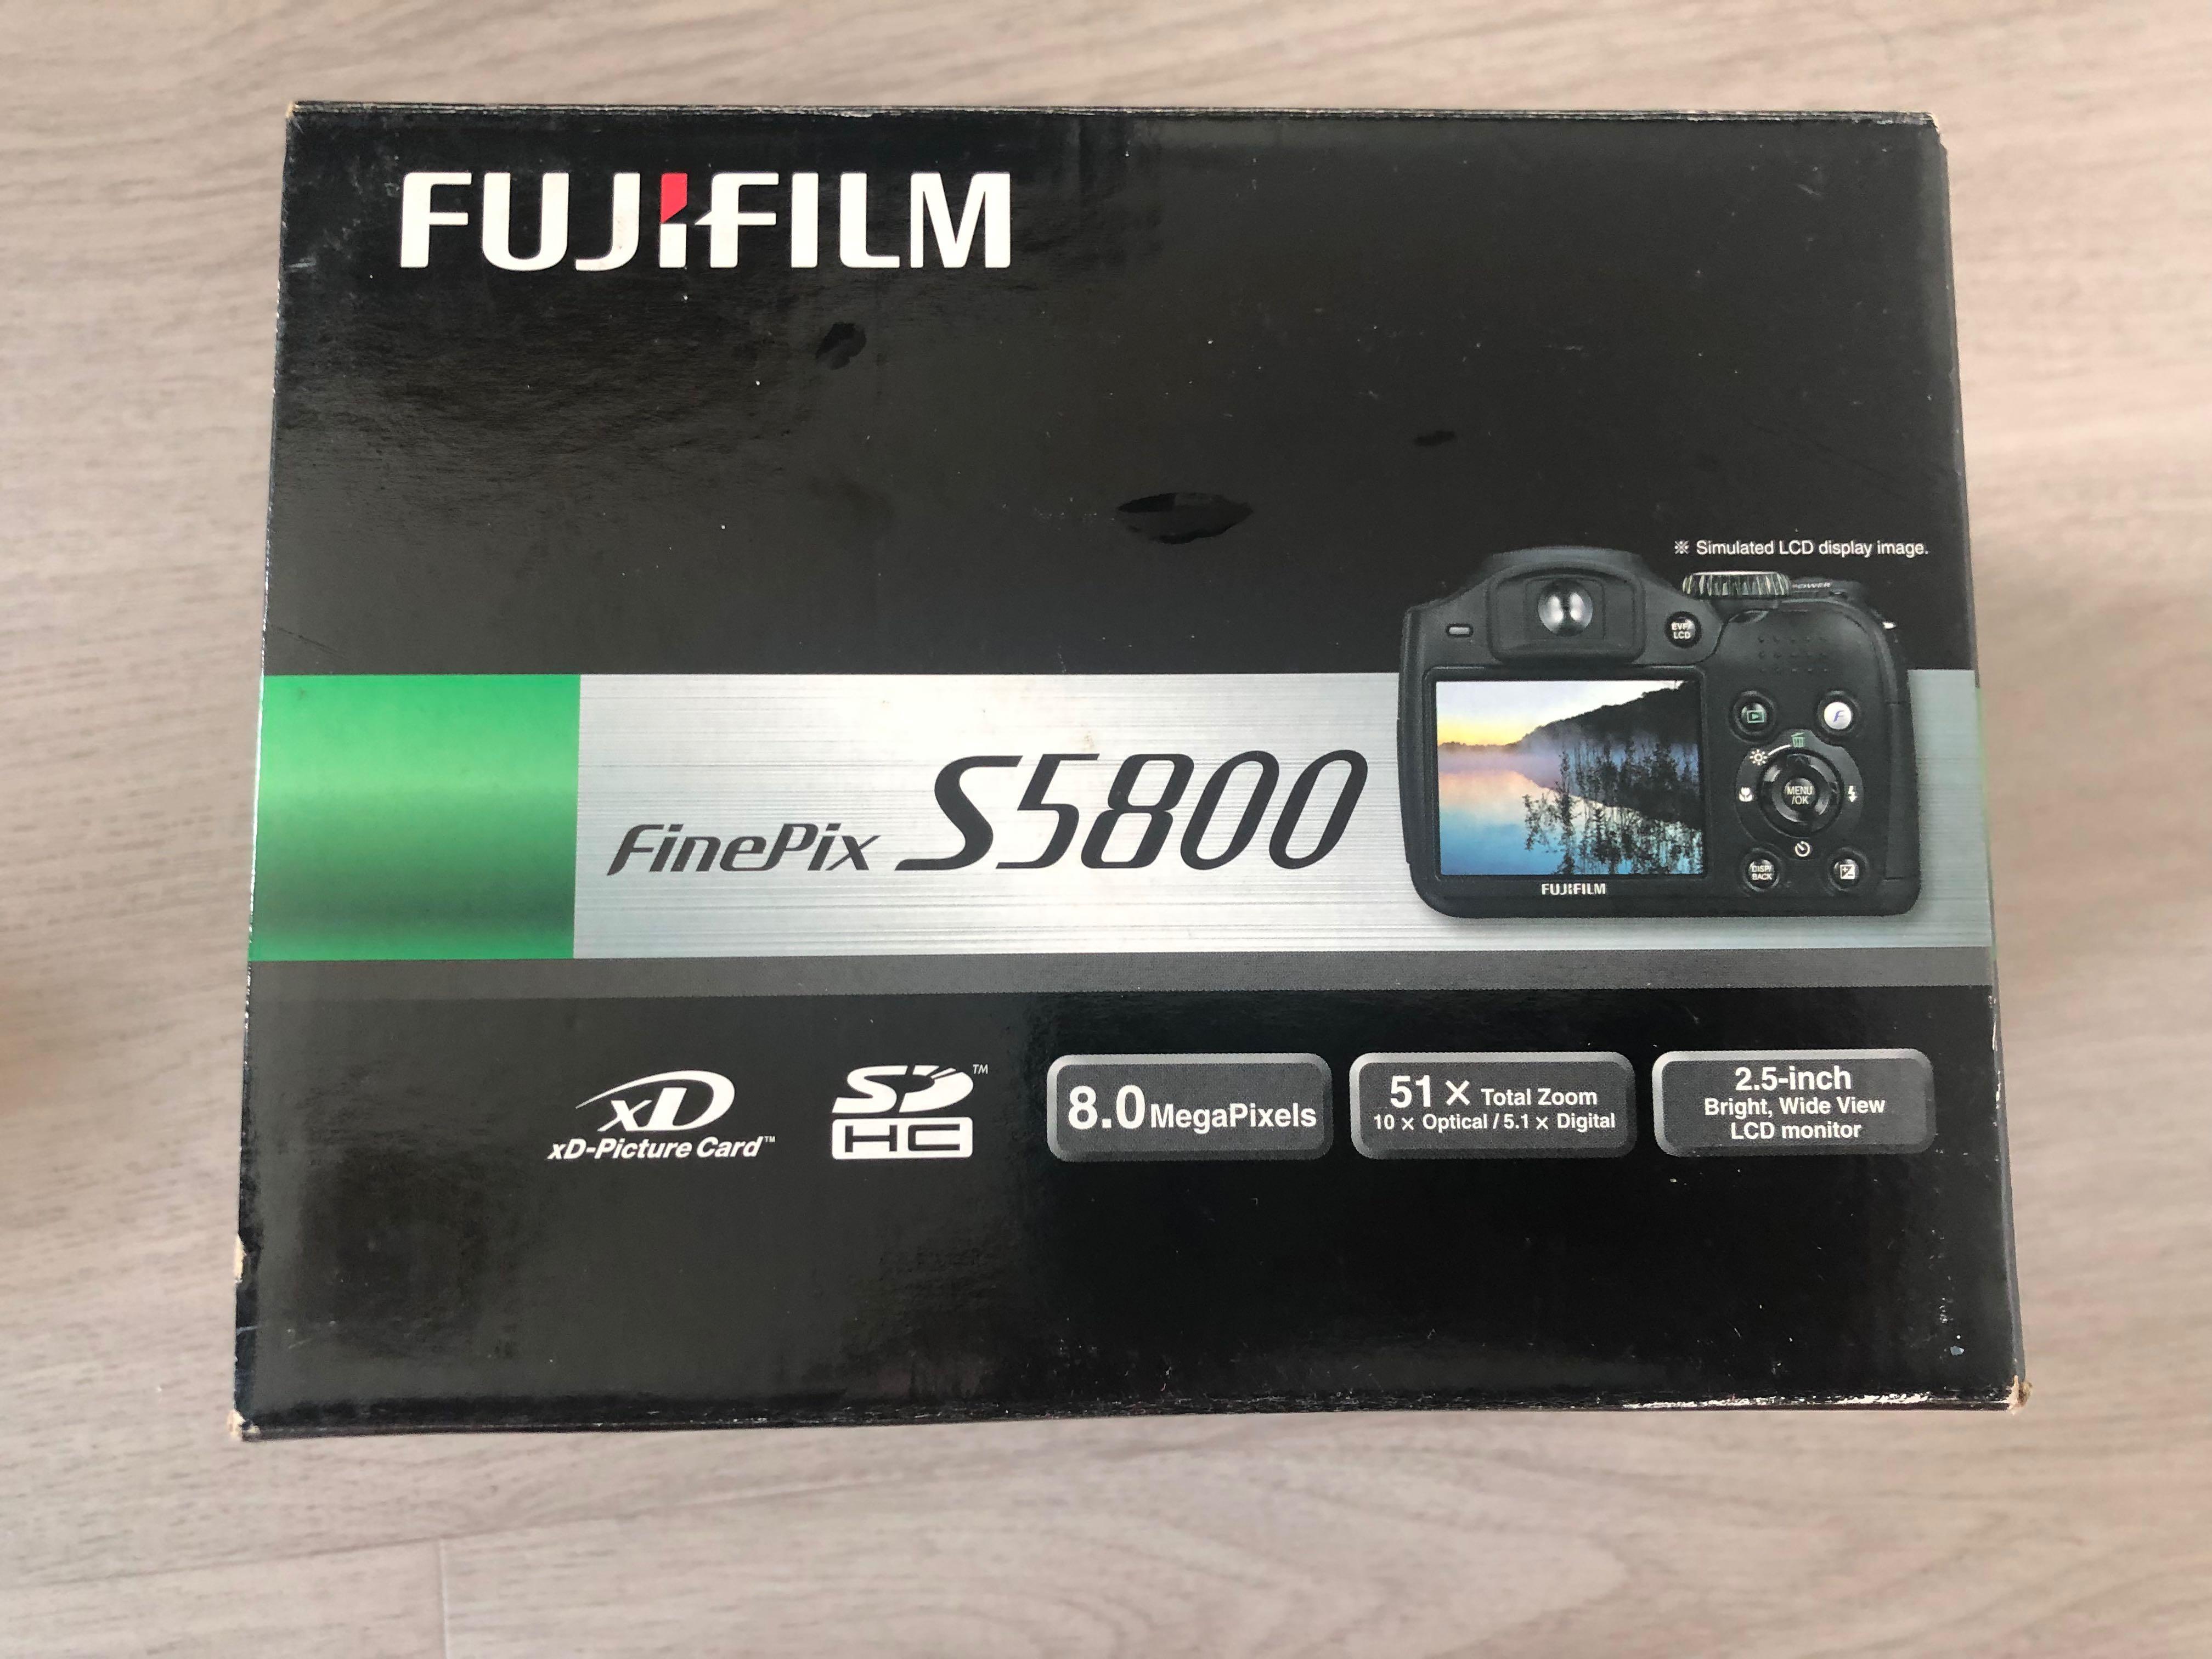 vloot instant projector Fujifilm FinePix S5800, Photography, Cameras on Carousell